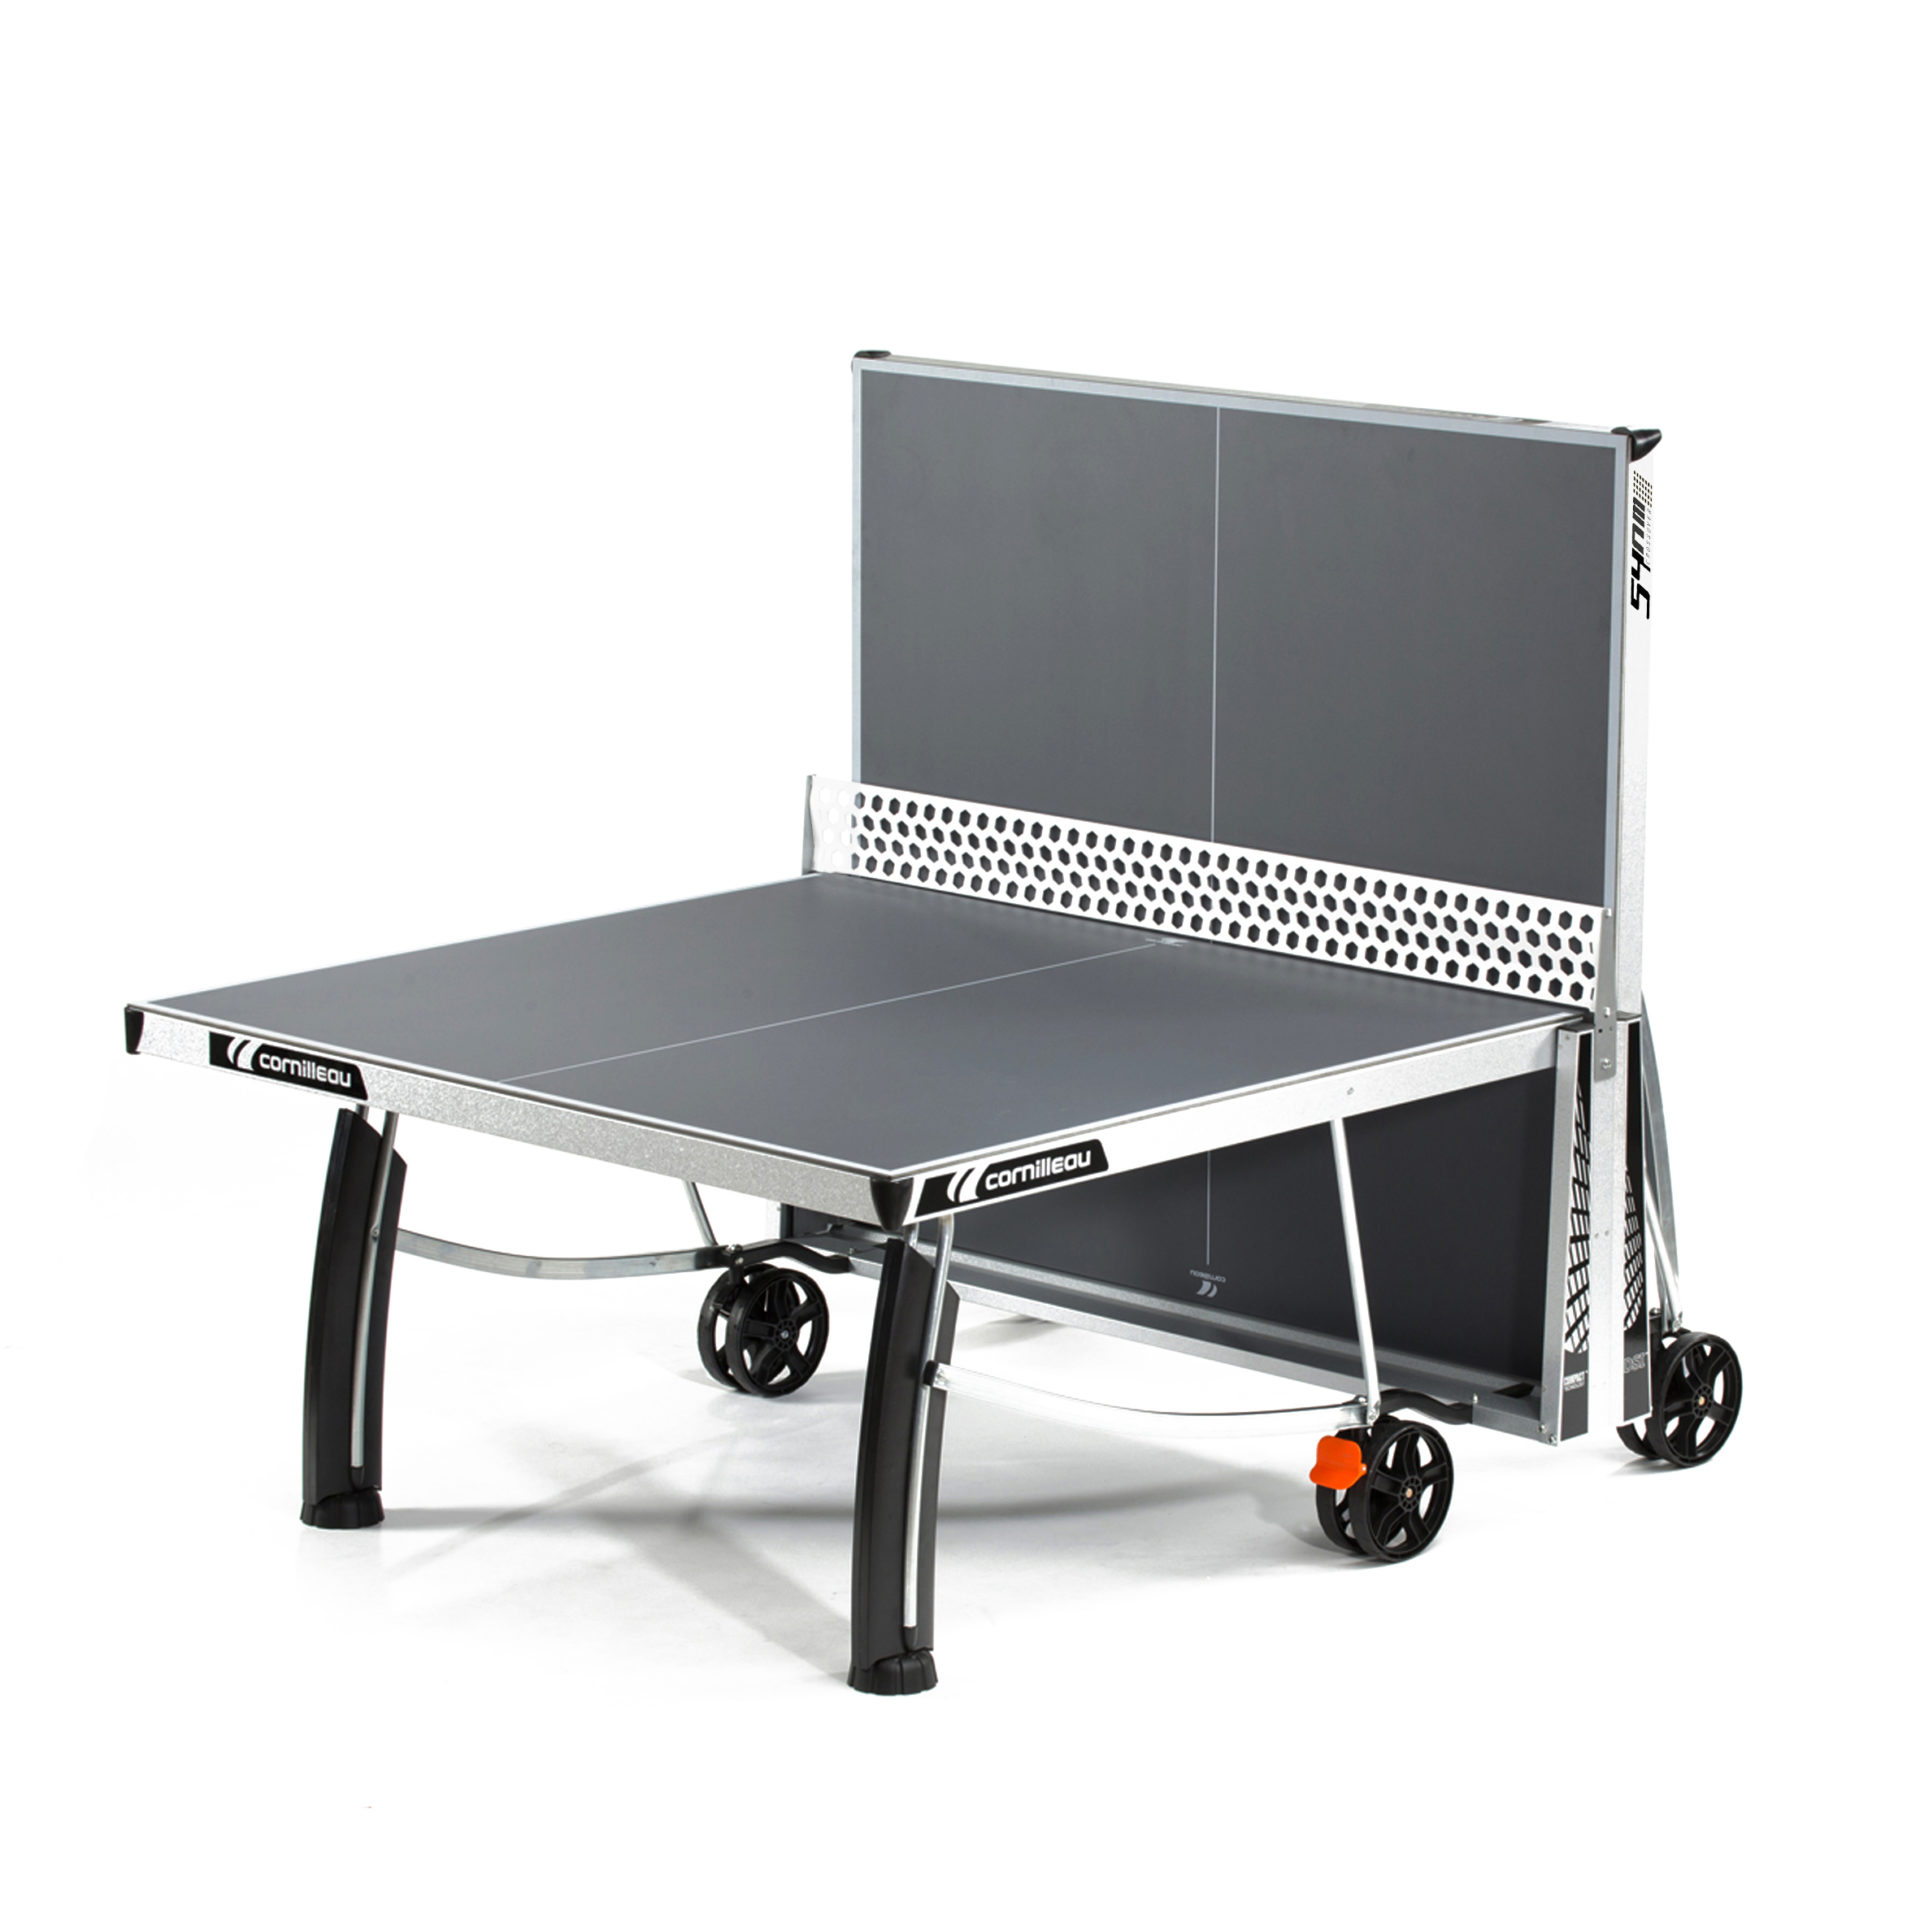 Omleiding toespraak Stereotype Cornilleau 540M Outdoor Ping Pong Table | Imagine That Pool Tables